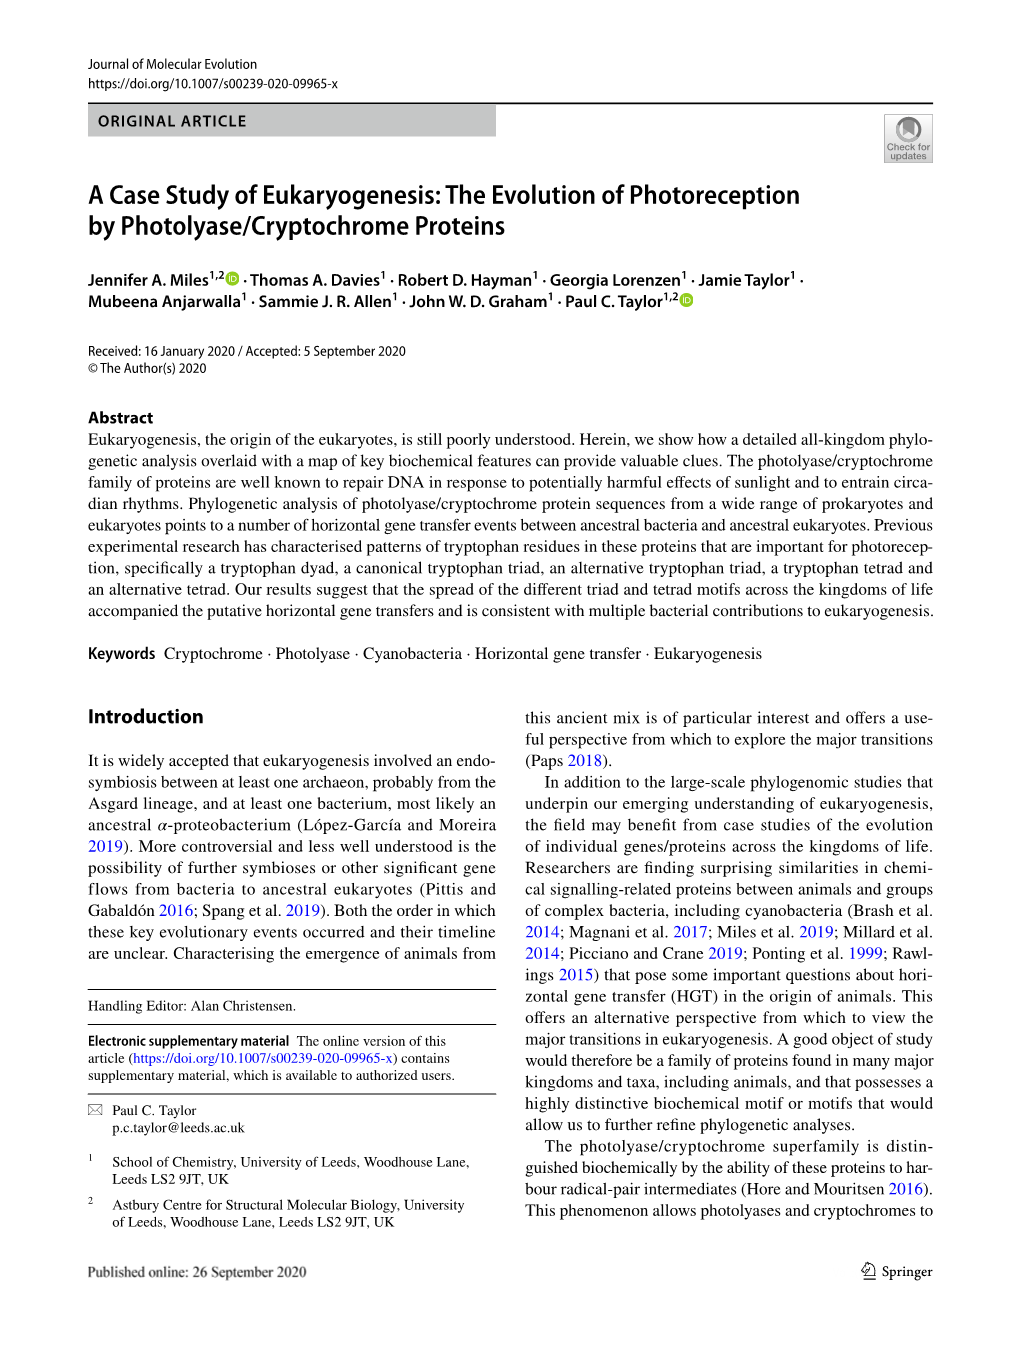 The Evolution of Photoreception by Photolyase/Cryptochrome Proteins